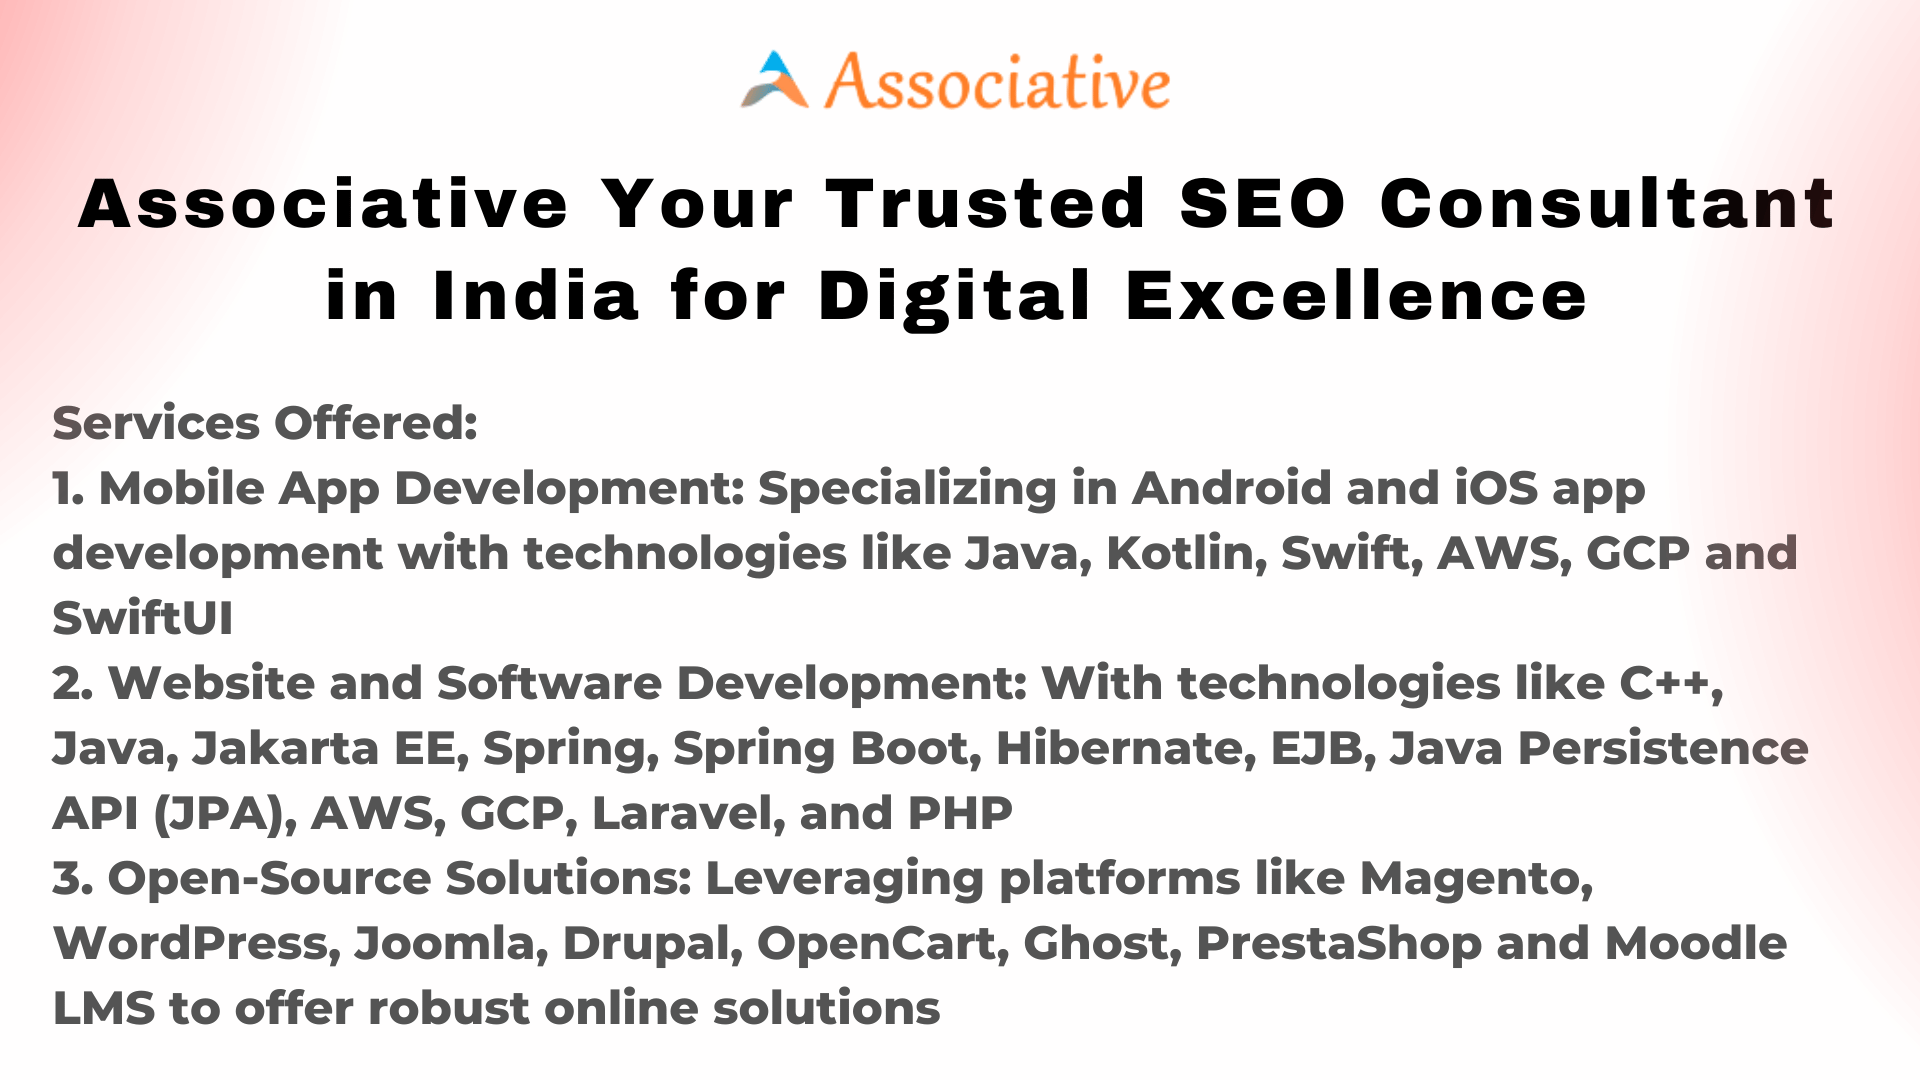 Associative Your Trusted SEO Consultant in India for Digital Excellence